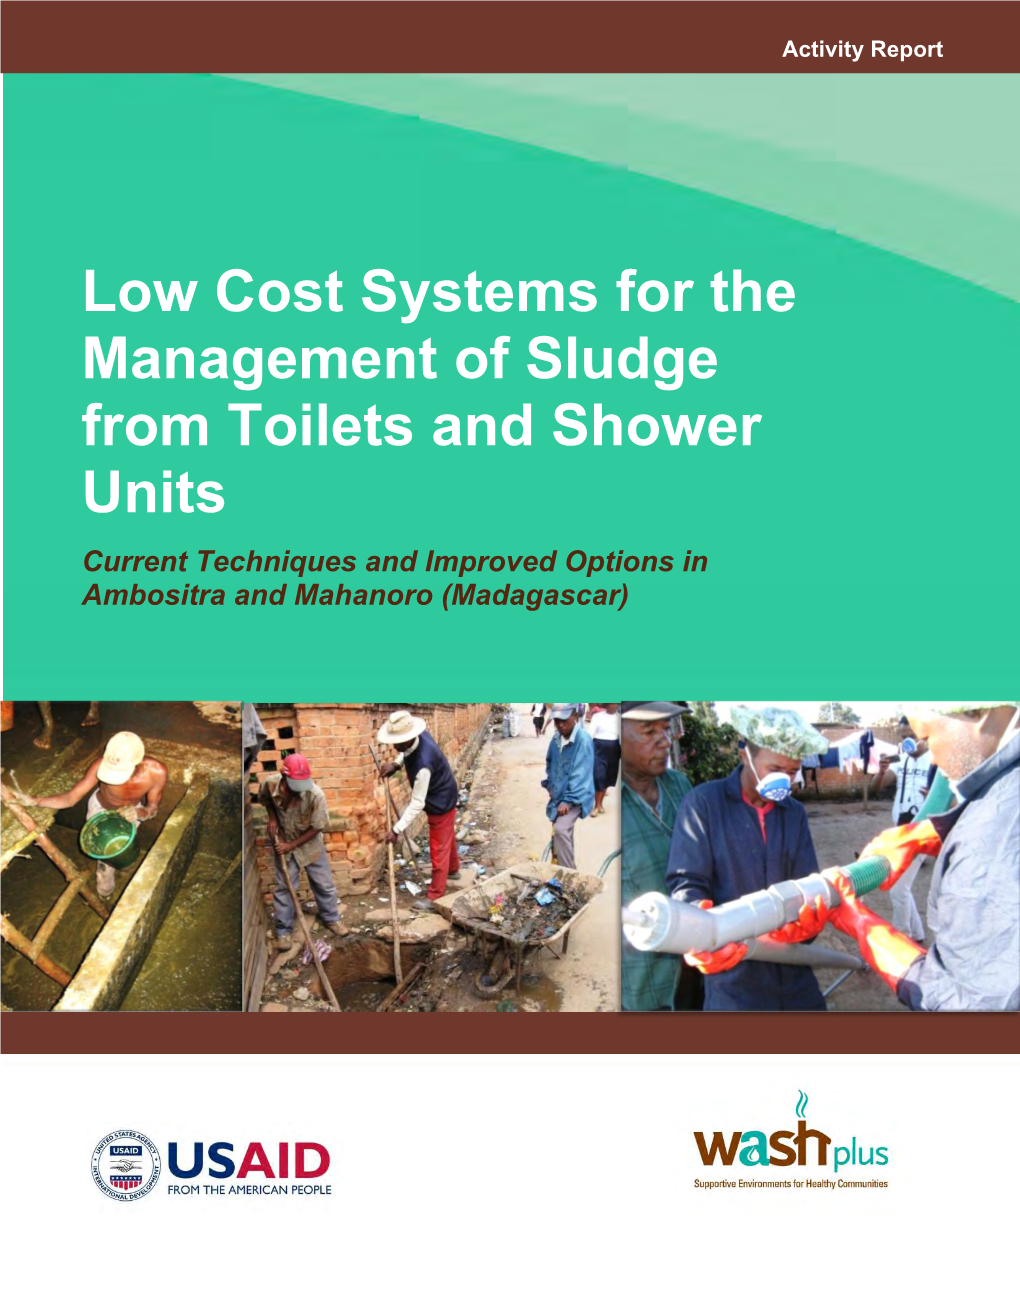 Low Cost Systems for the Management of Sludge from Toilets and Shower Units Current Techniques and Improved Options in Ambositra and Mahanoro (Madagascar)